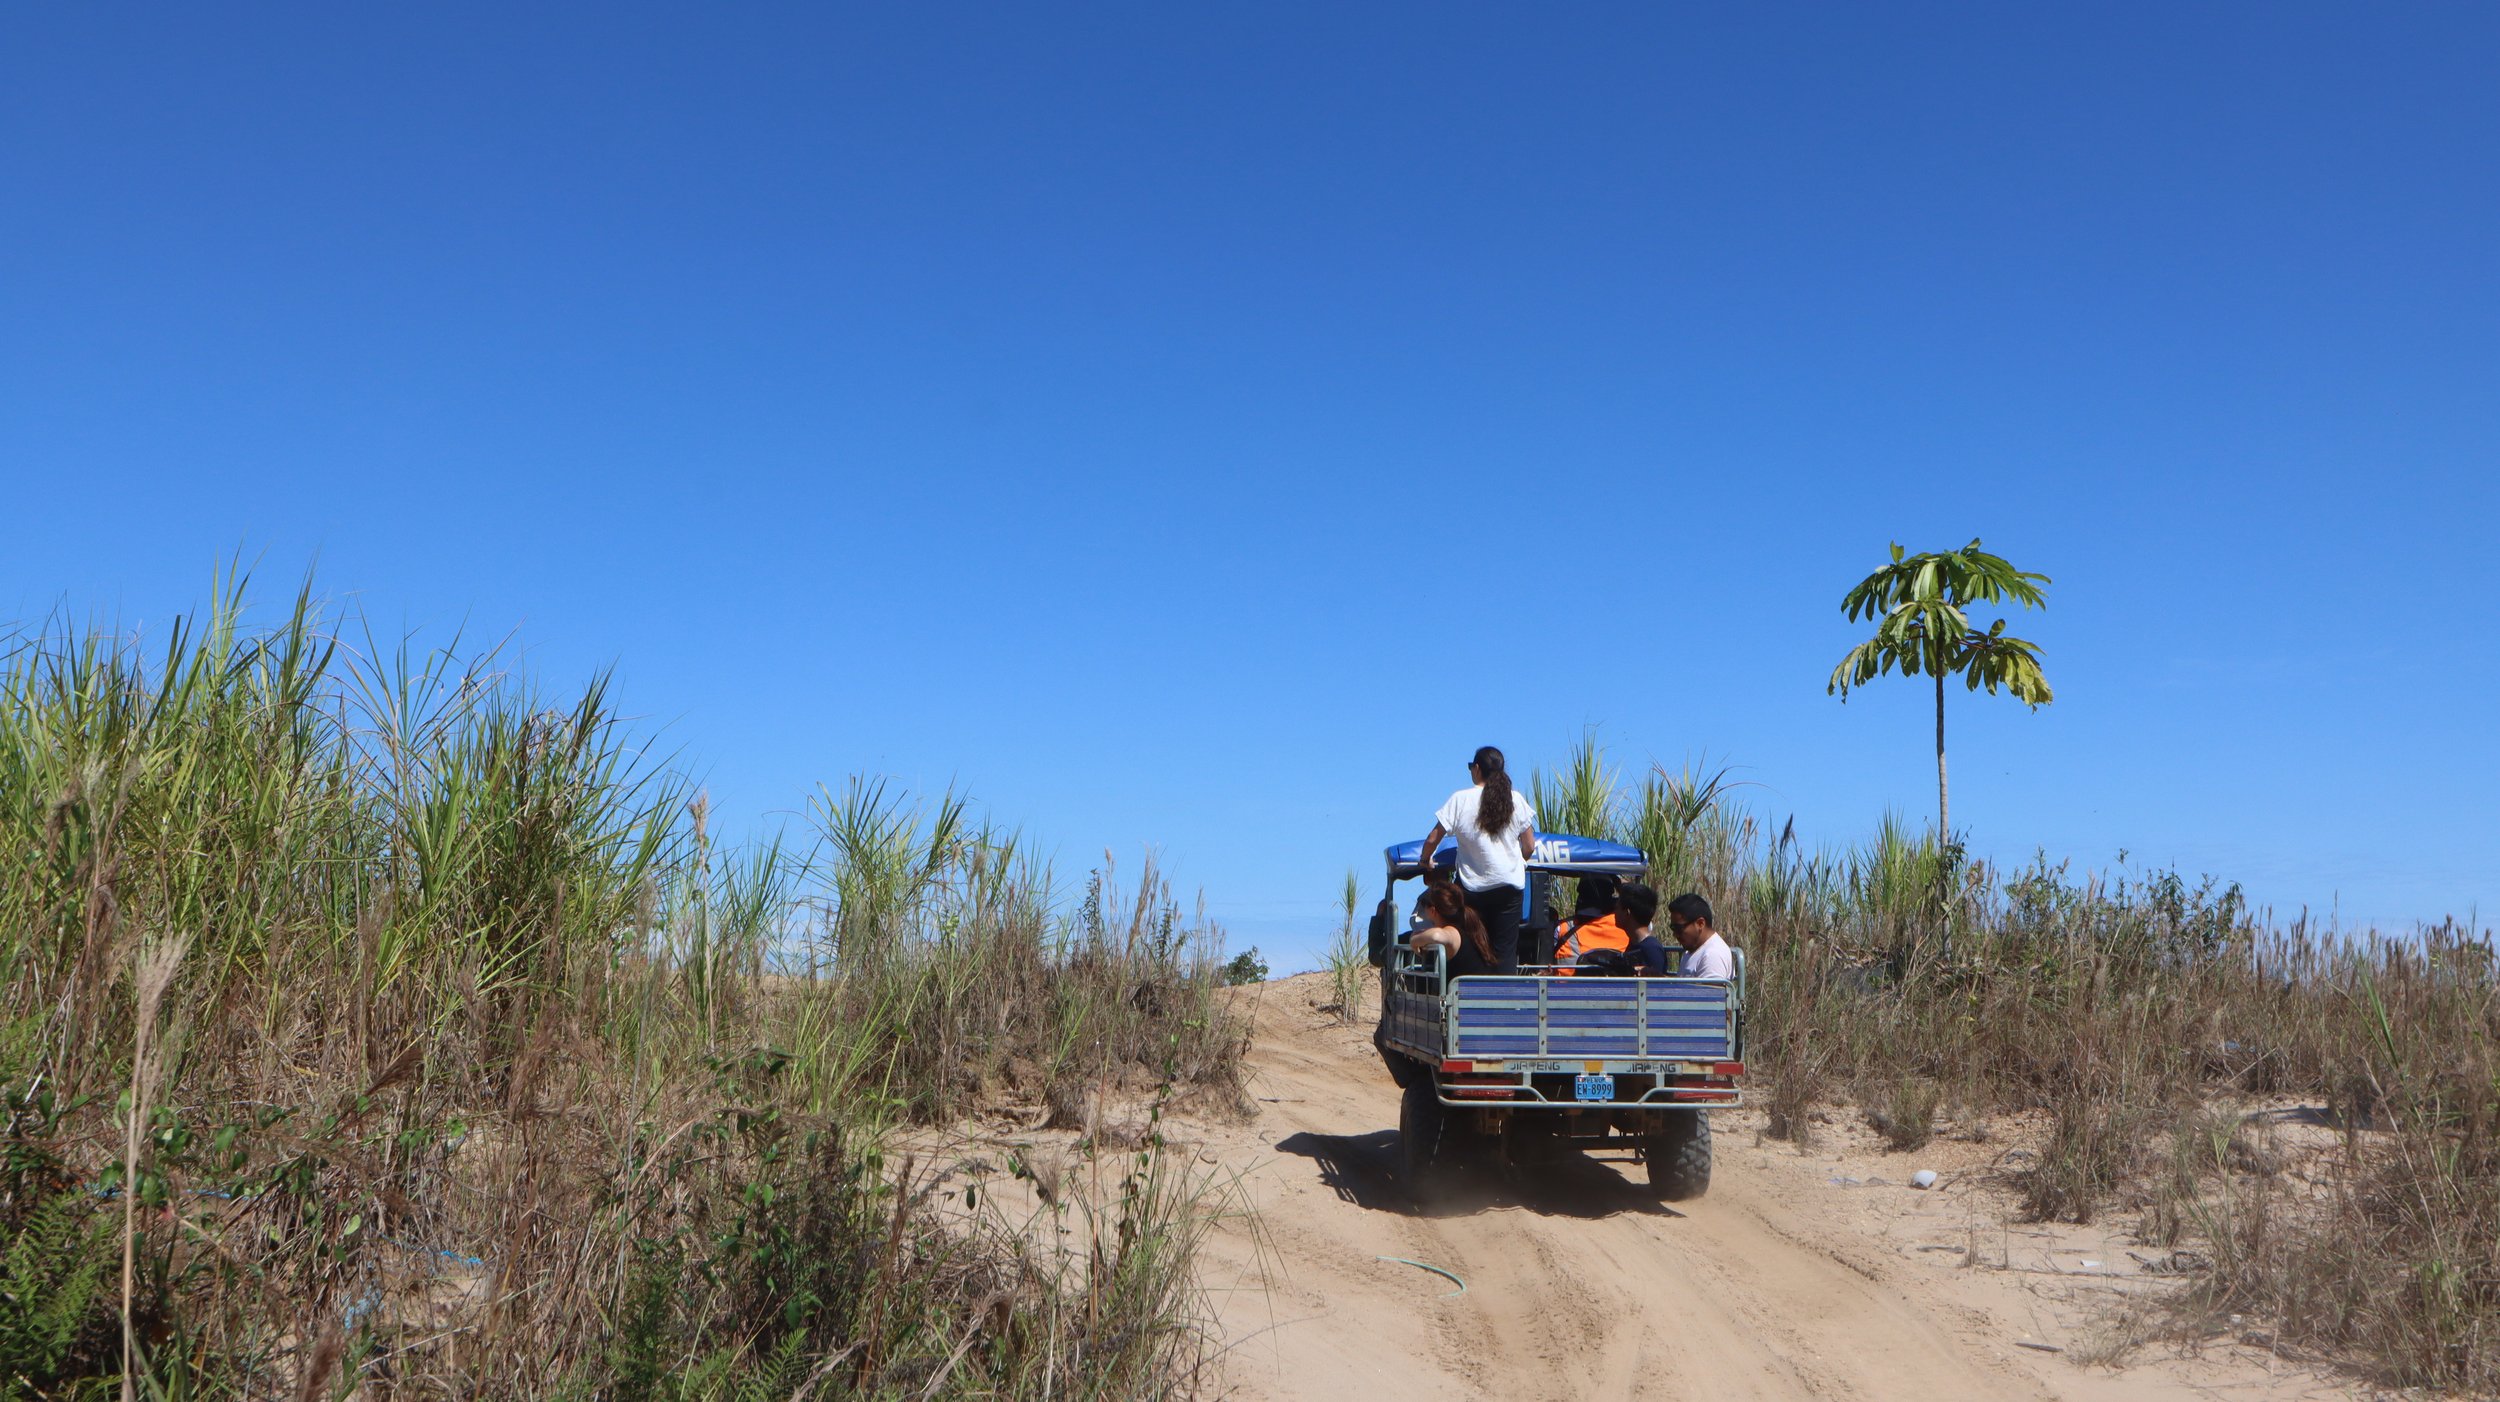 On the road to the Tambopata National Reserve